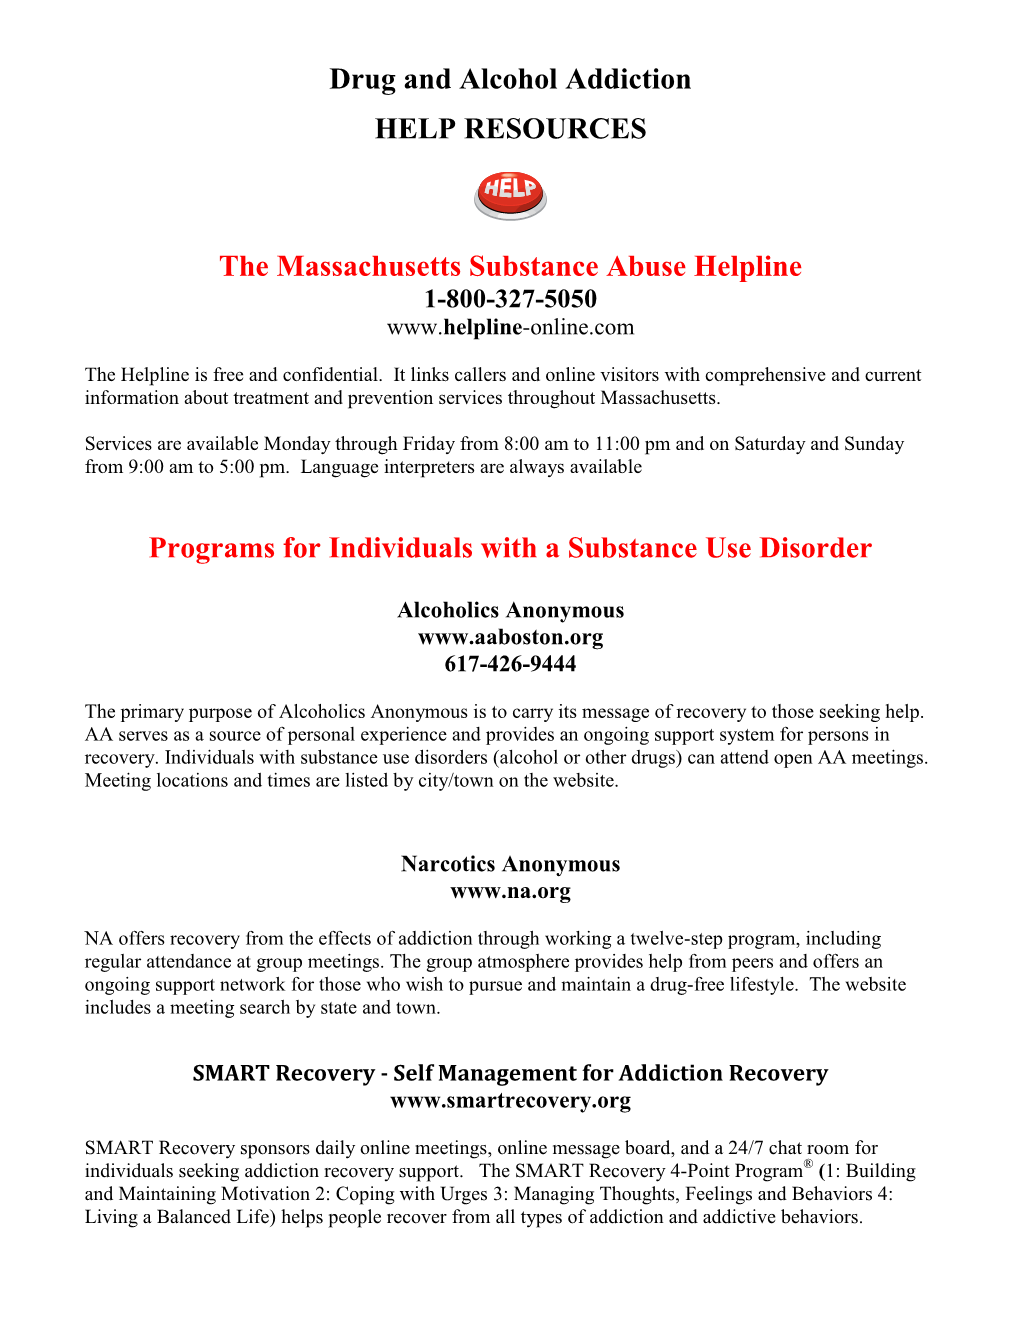 Drug and Alcohol Addiction HELP RESOURCES the Massachusetts